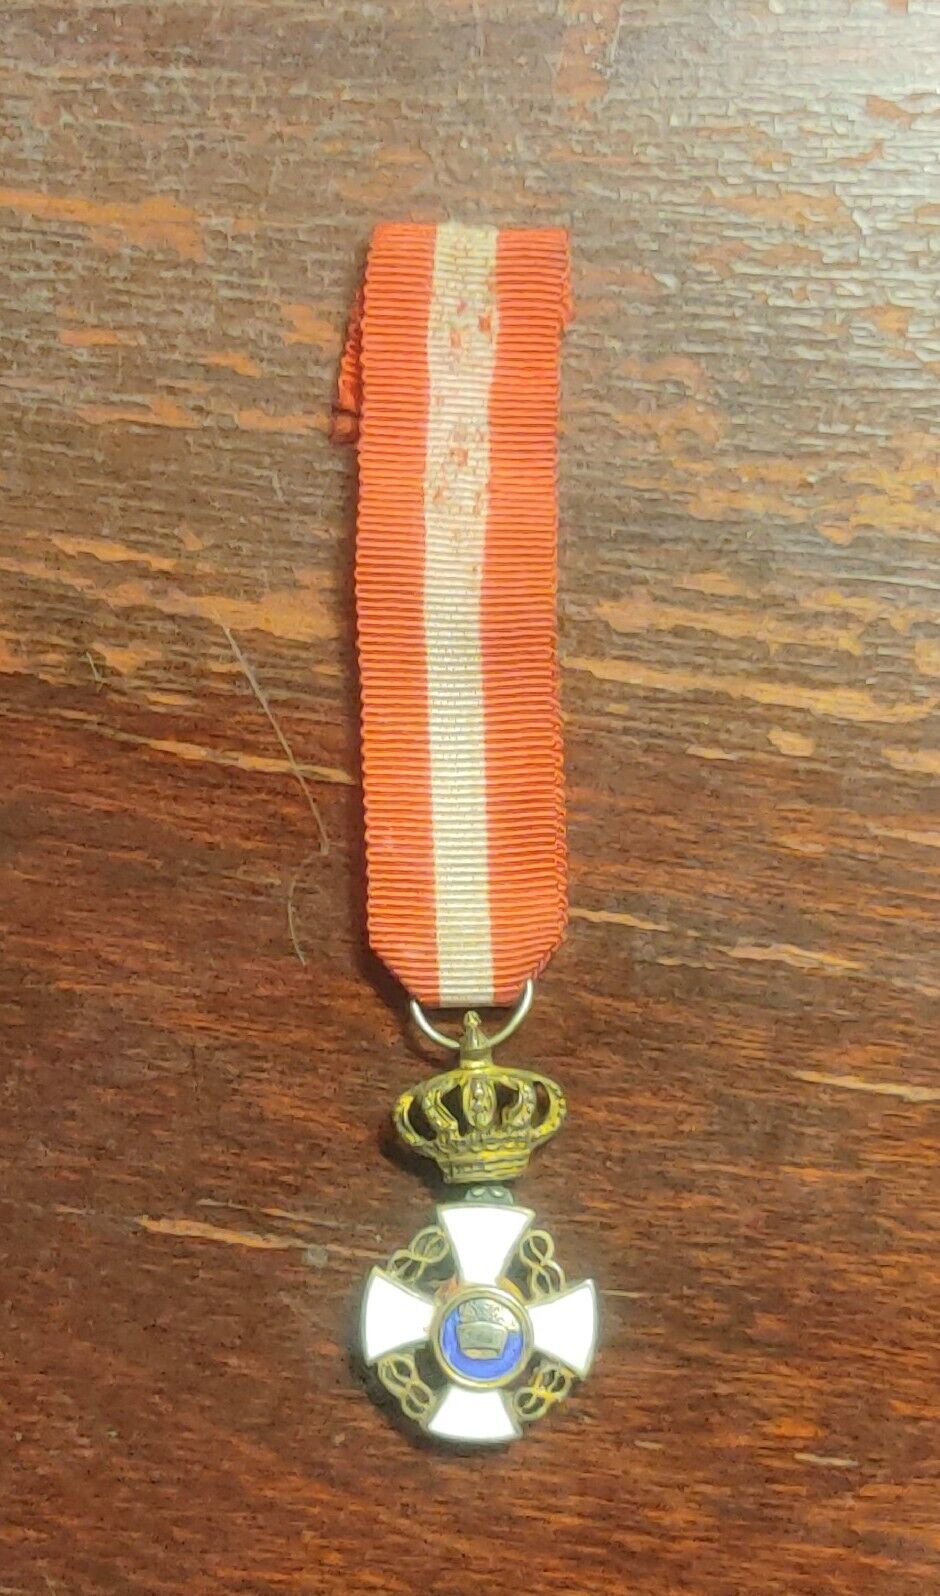 RARE ITALIAN WW1 ORDER OF THE CROWN OFFICER ITALY MEDAL 